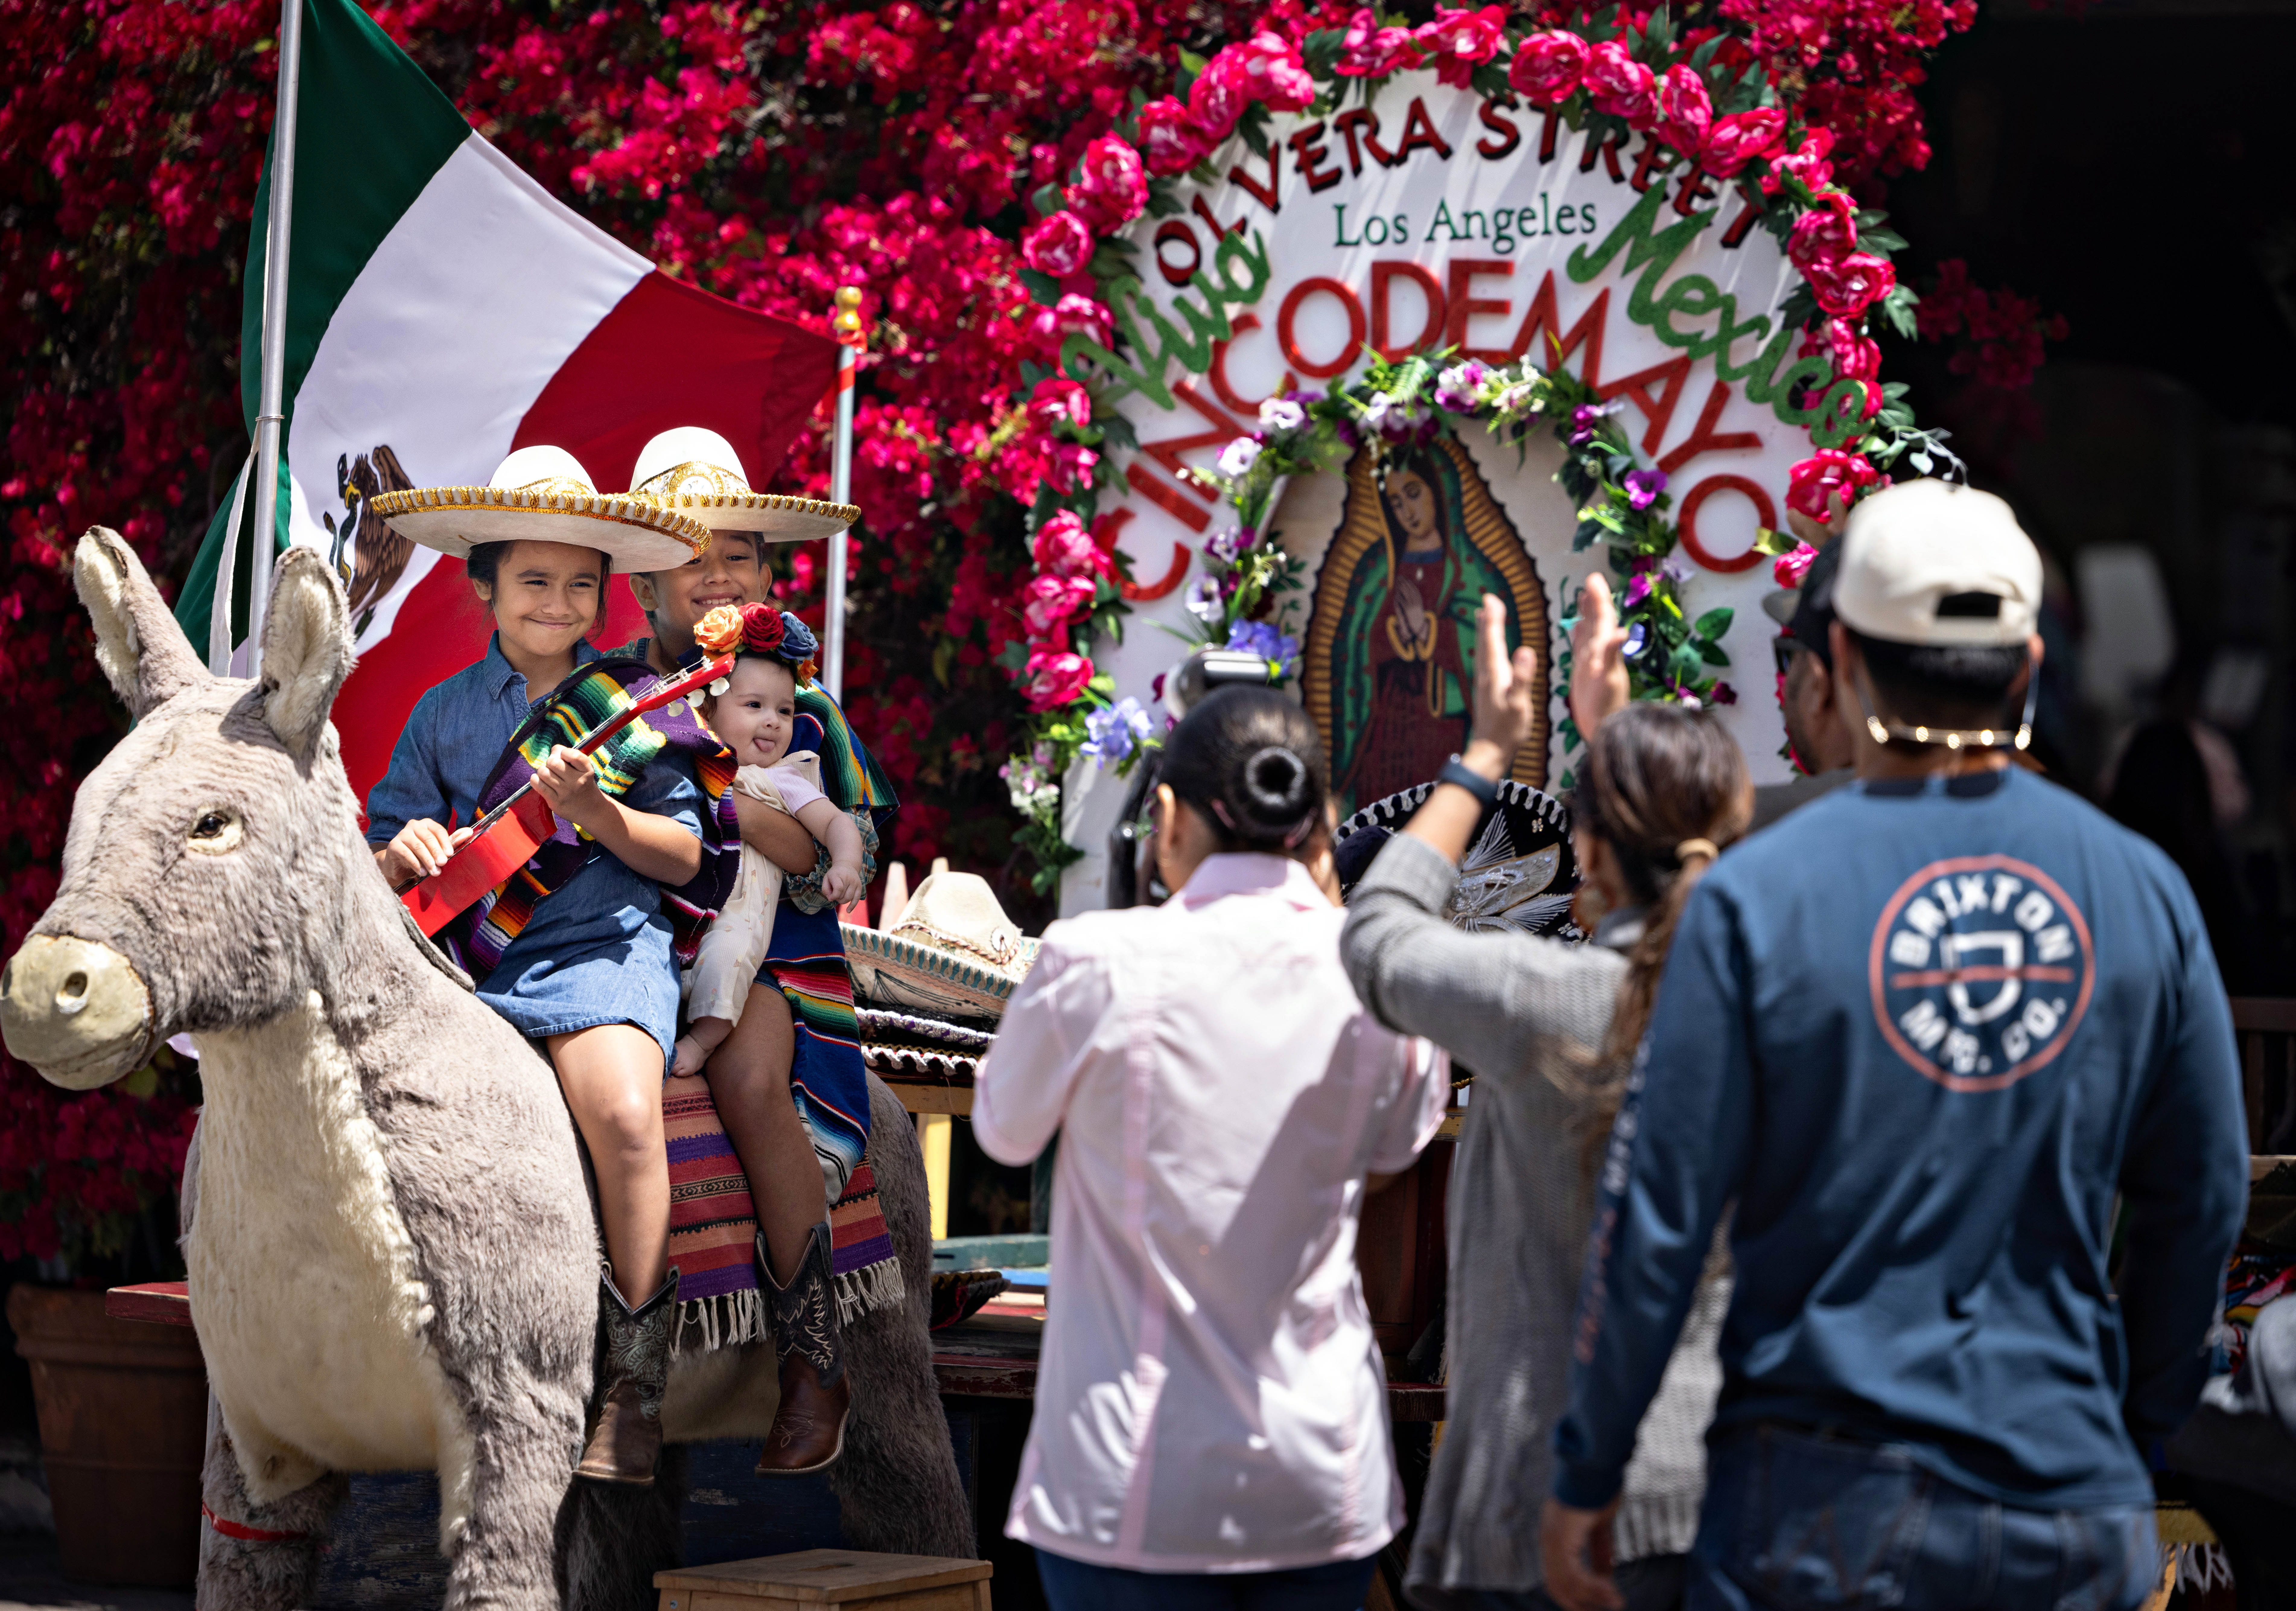 Why is a stuffed burro facing eviction from Olvera Street?